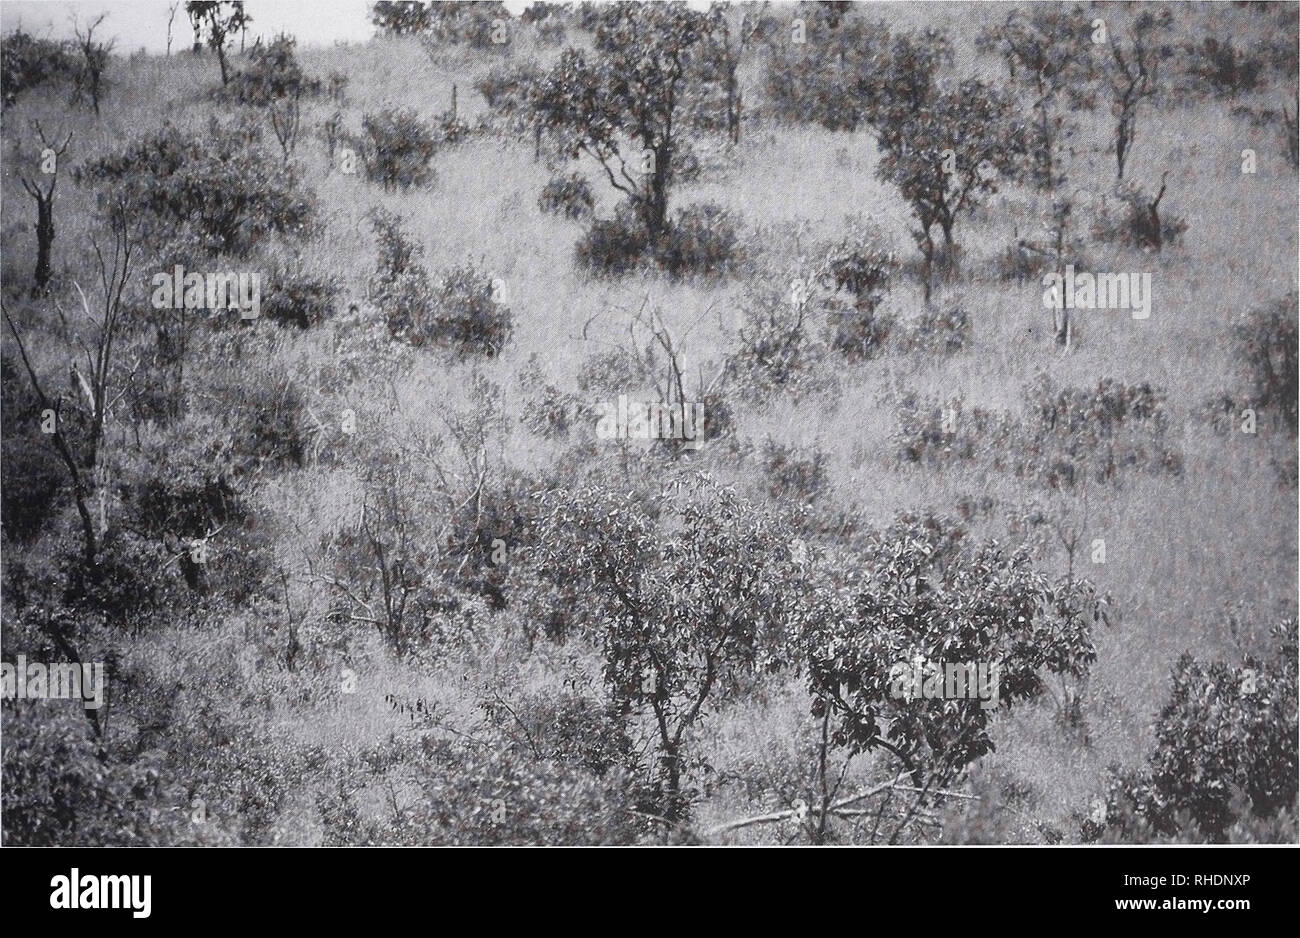 . Bonner zoologische Monographien. Zoology. FIG. 5. Leleshwa-Euclea-Acacia gerrardi-Rhus bushland, degraded in part, at right, meeting Acacia abyssinca- Croton riverine woodland (left) near Sipili (SI) 29 December 1991. Here one meets a rich mixture of bushland and woodland birds and mammals. View to NW.. FIG. 6. Combretum wooded grassland slope with thickets of Carissa-Euclea-Rhus-Ruttya 2 September 1987, on slope above the Lugga Maji Nyoka site UL. Most Combretum trees are C. molle, the roots of which are favored by elephants as food. Habitat of various cisticolas, larks, serins, sunbirds, a Stock Photo